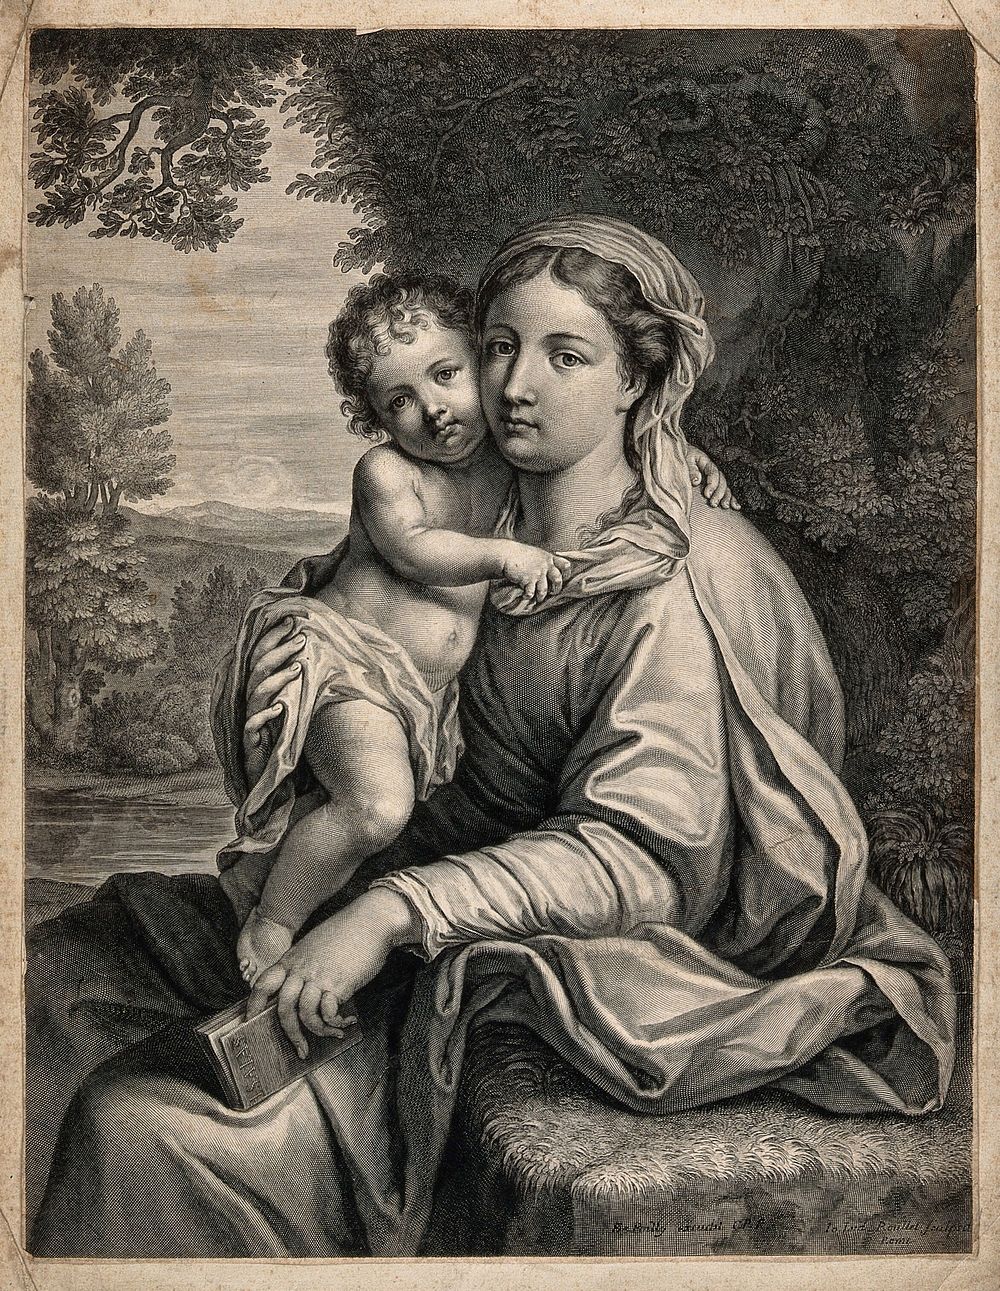 Saint Mary (the Blessed Virgin) with the Christ Child. Engraving by J.L. Roullet after Annibale Carracci.